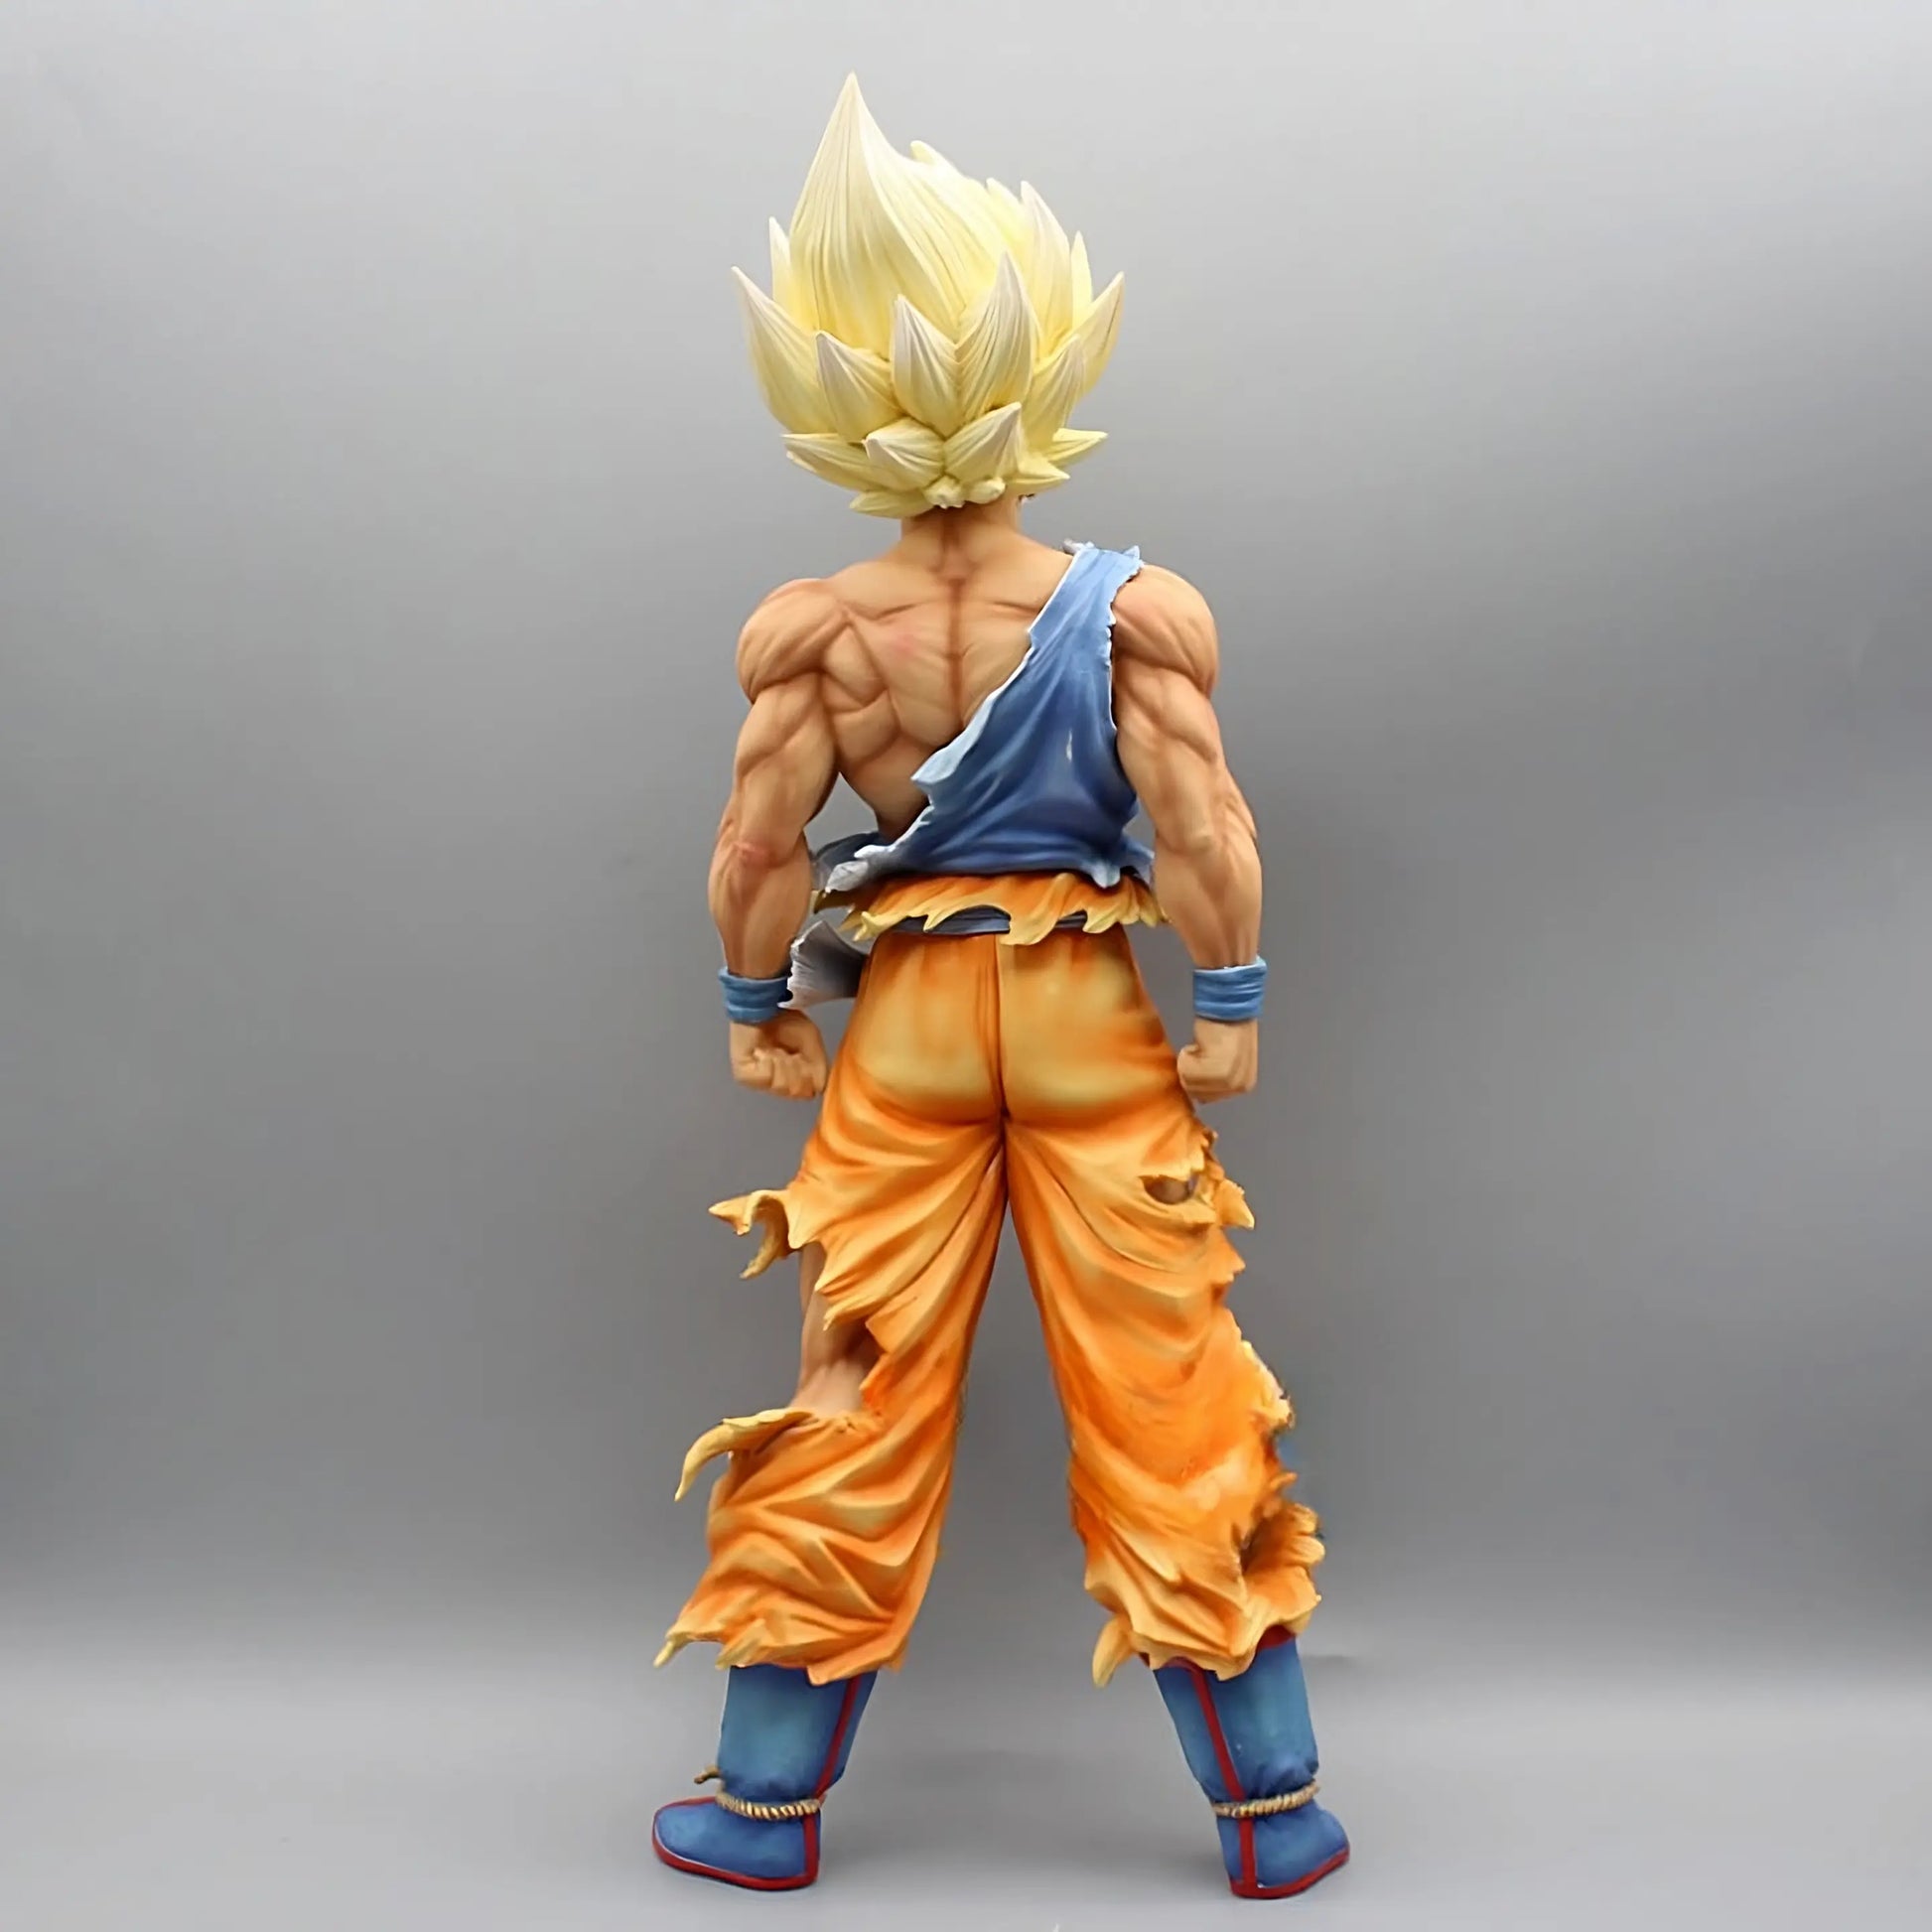 Rear view of the 'Ascend to Saiyan Glory Goku' figure from Dragon Ball, featuring Goku in Super Saiyan form with spiky golden hair and detailed muscular back. His iconic orange gi is tattered, flaring out at the bottom, and his blue sash billows to the side, emphasizing the energy of transformation, all set against a plain background to highlight the figure's details.